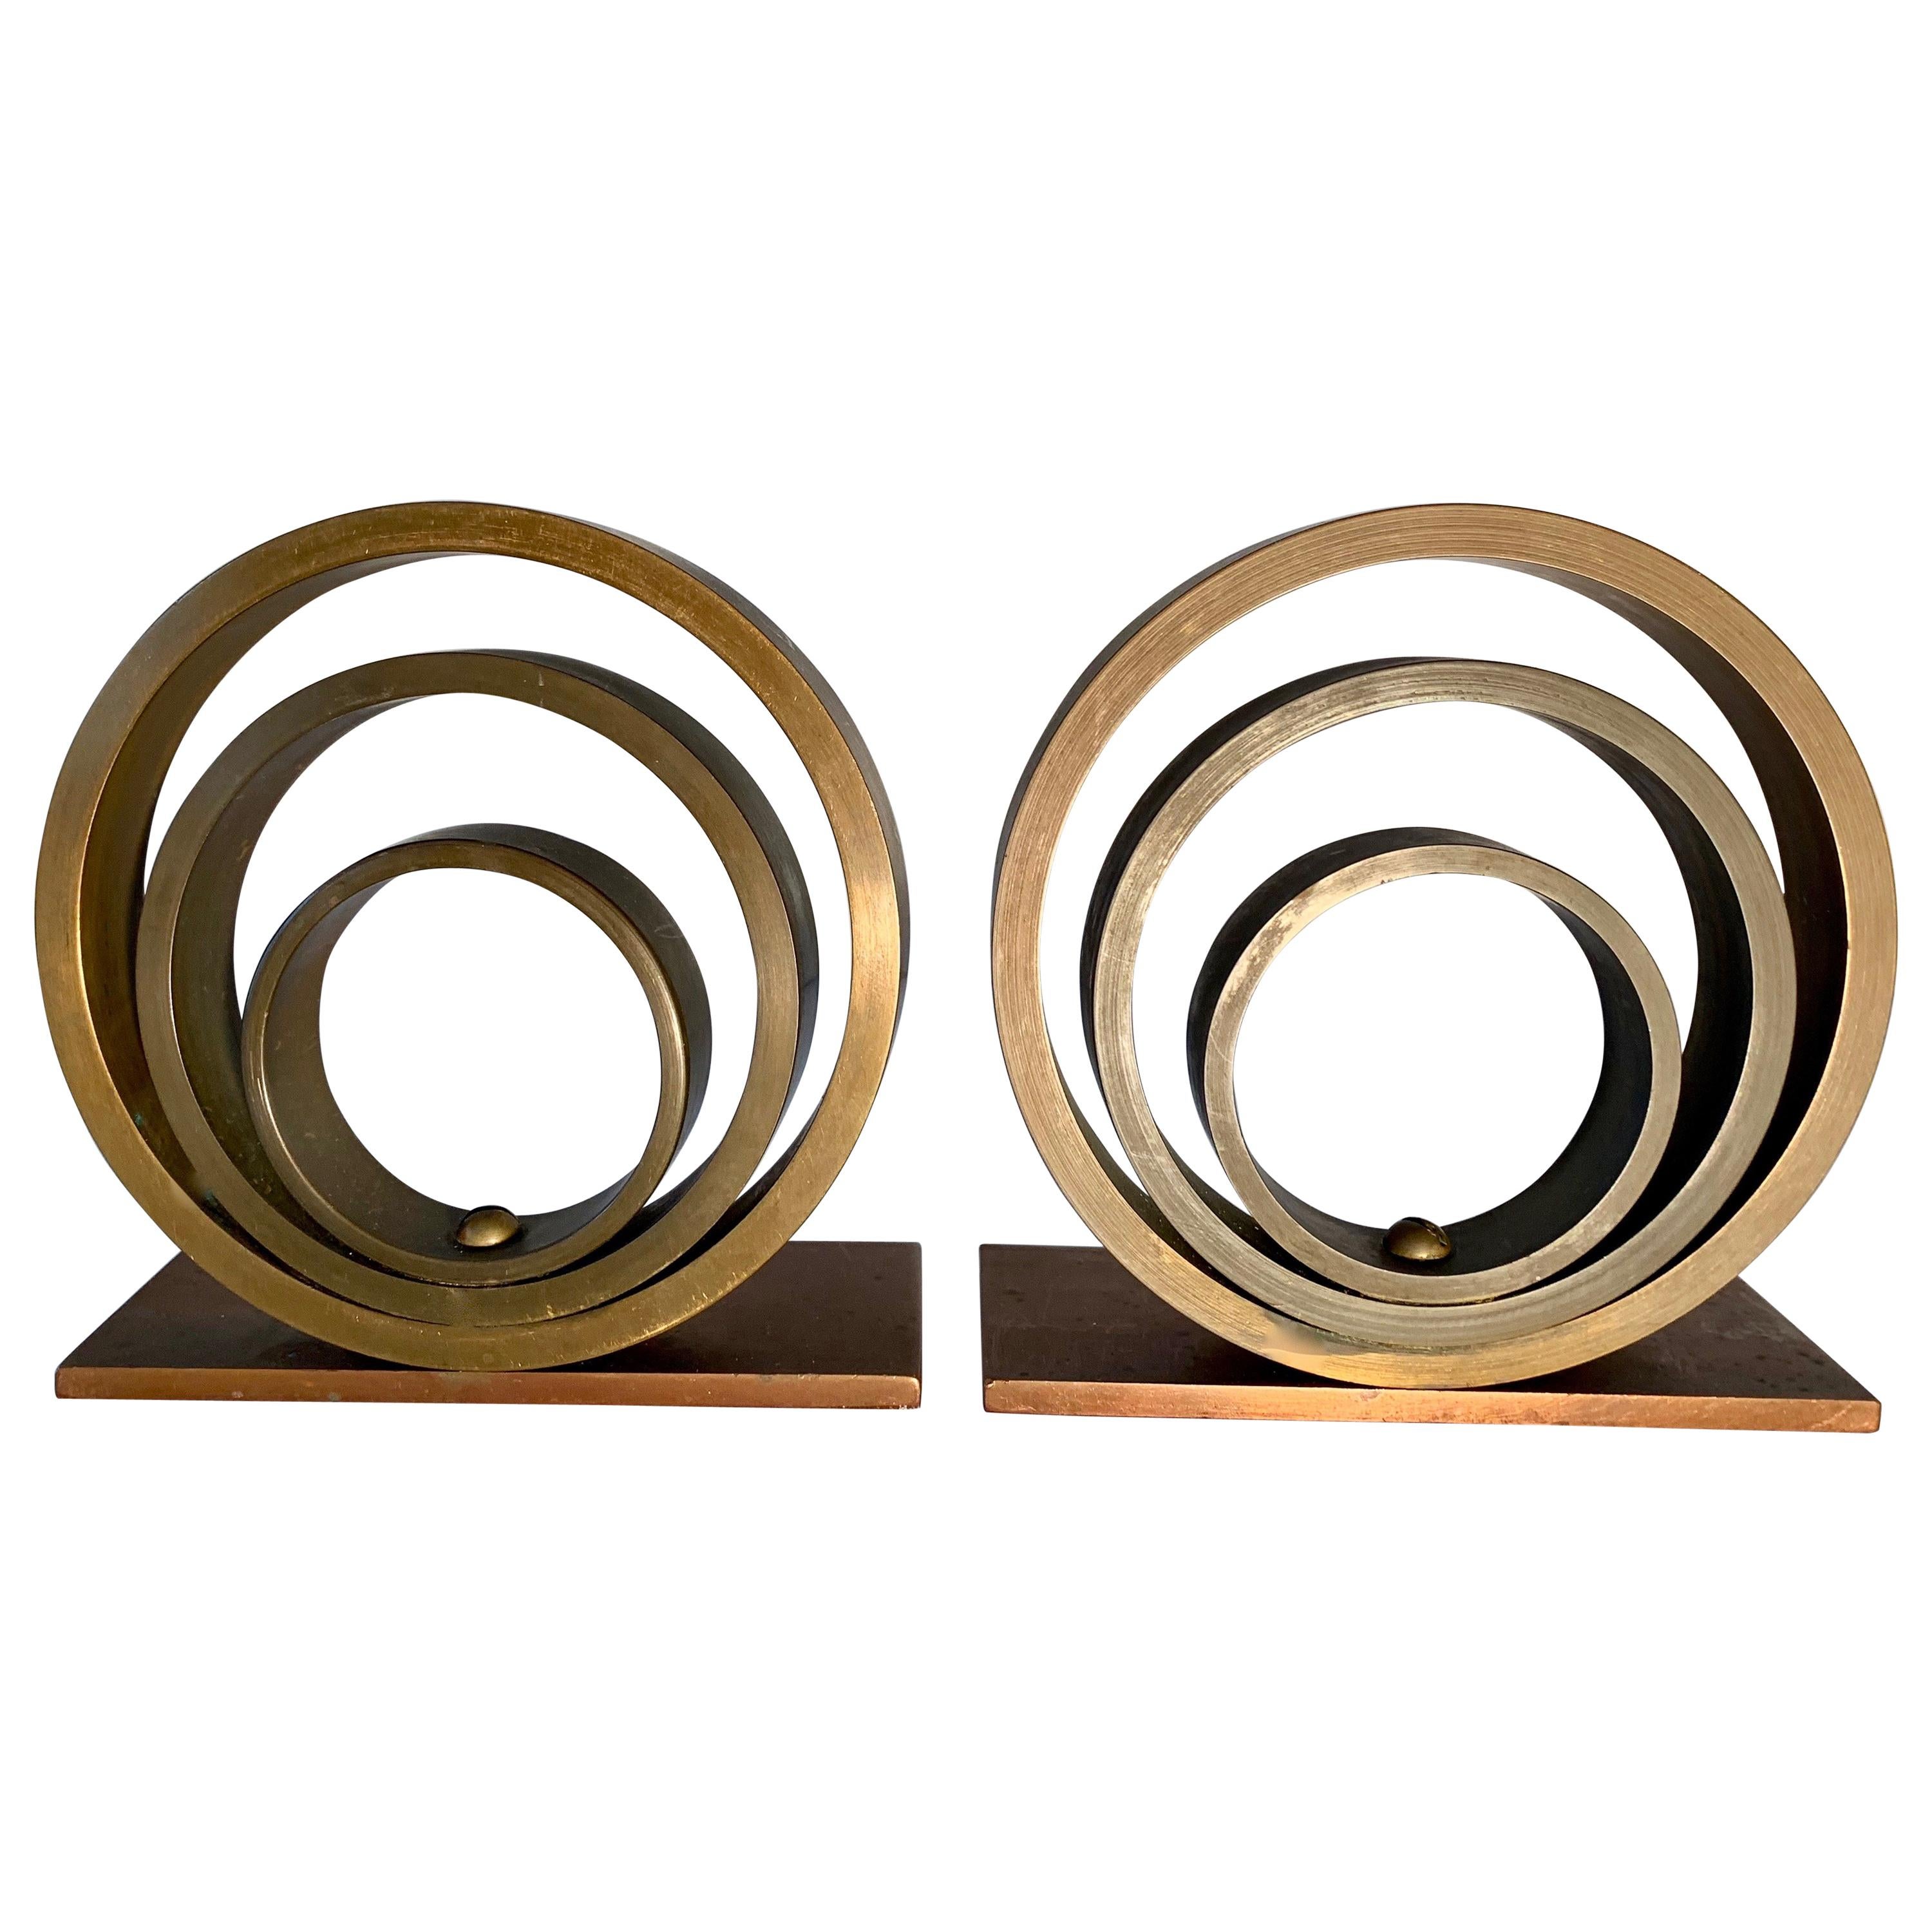 Pair of Brass and Copper Ring Bookends